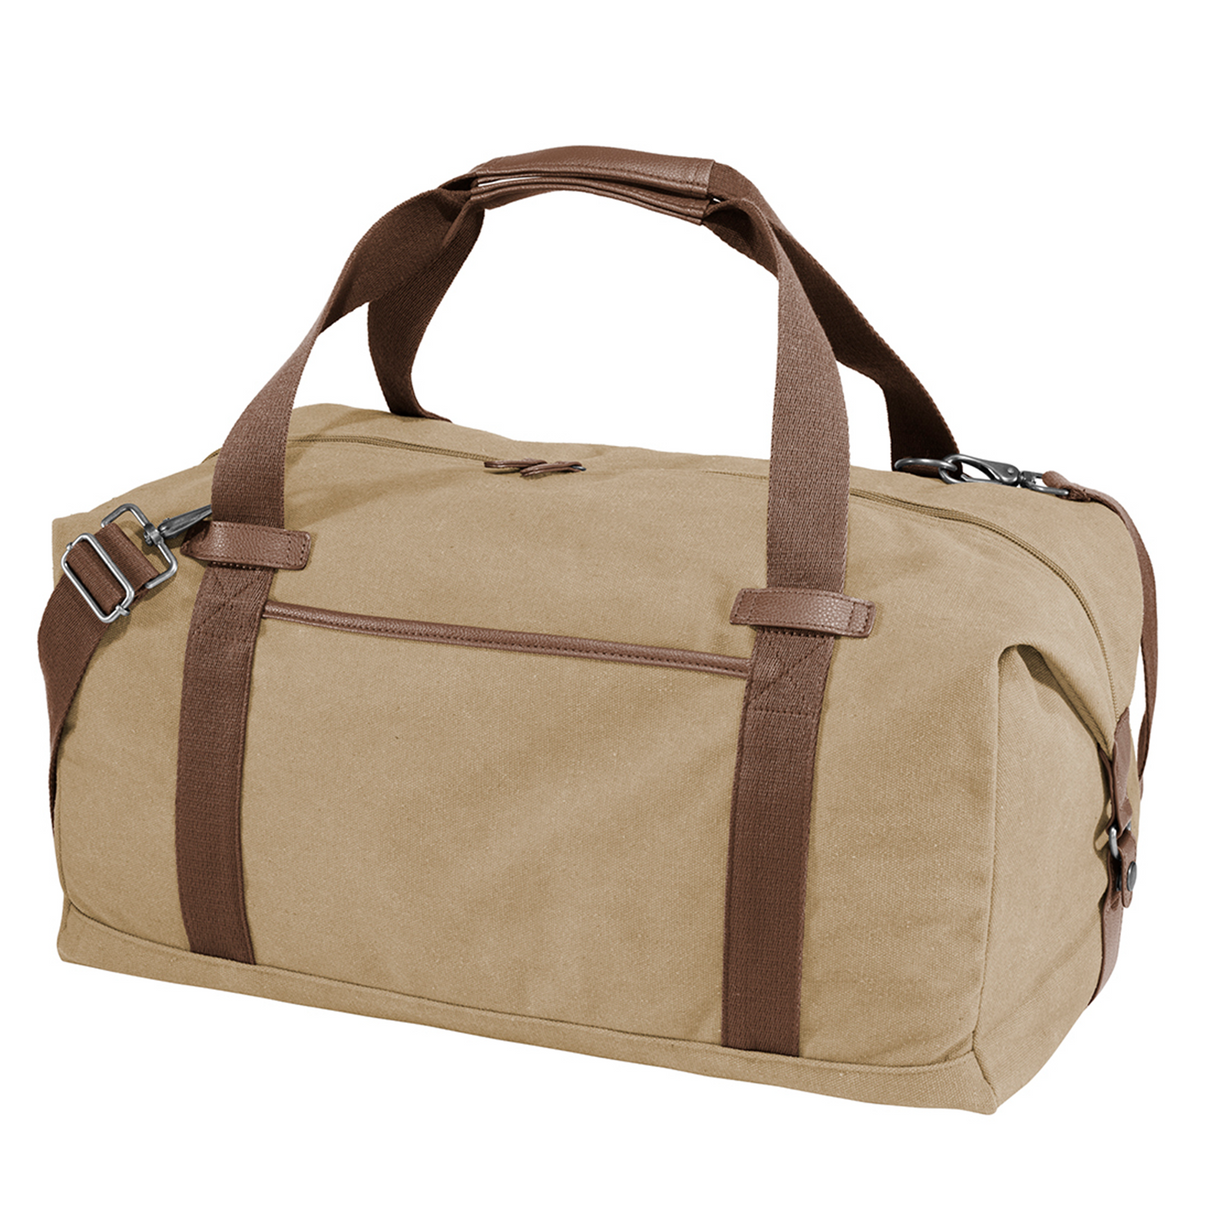 Deluxe Canvas Gym Duffel